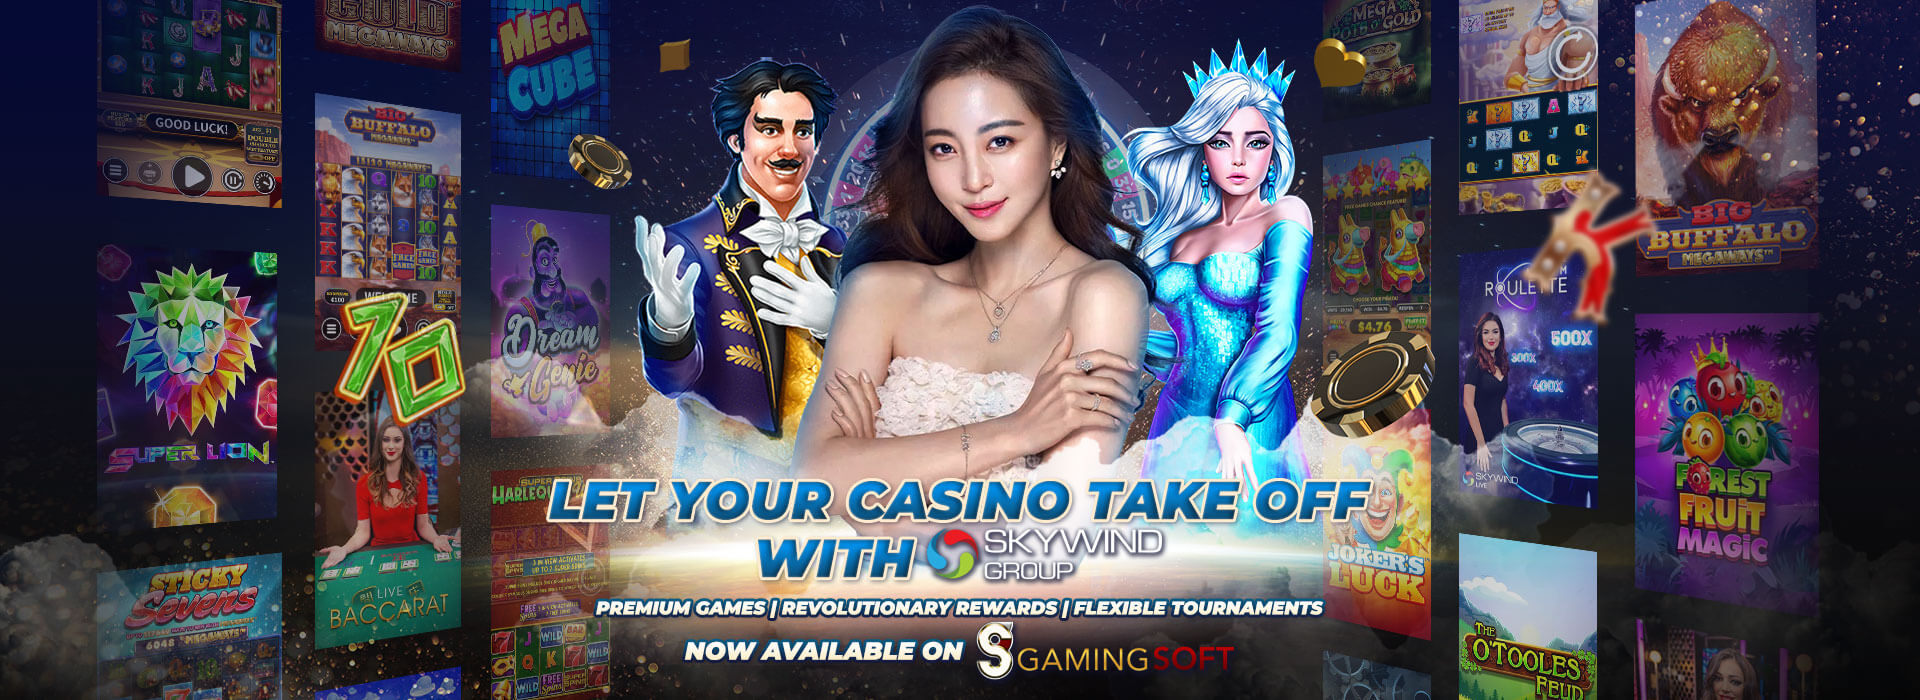 Premium Games Revolutionary Rewards Flexible Tournament Let your Casino Take Off With Skywind Group Web Banner - GamingSoft